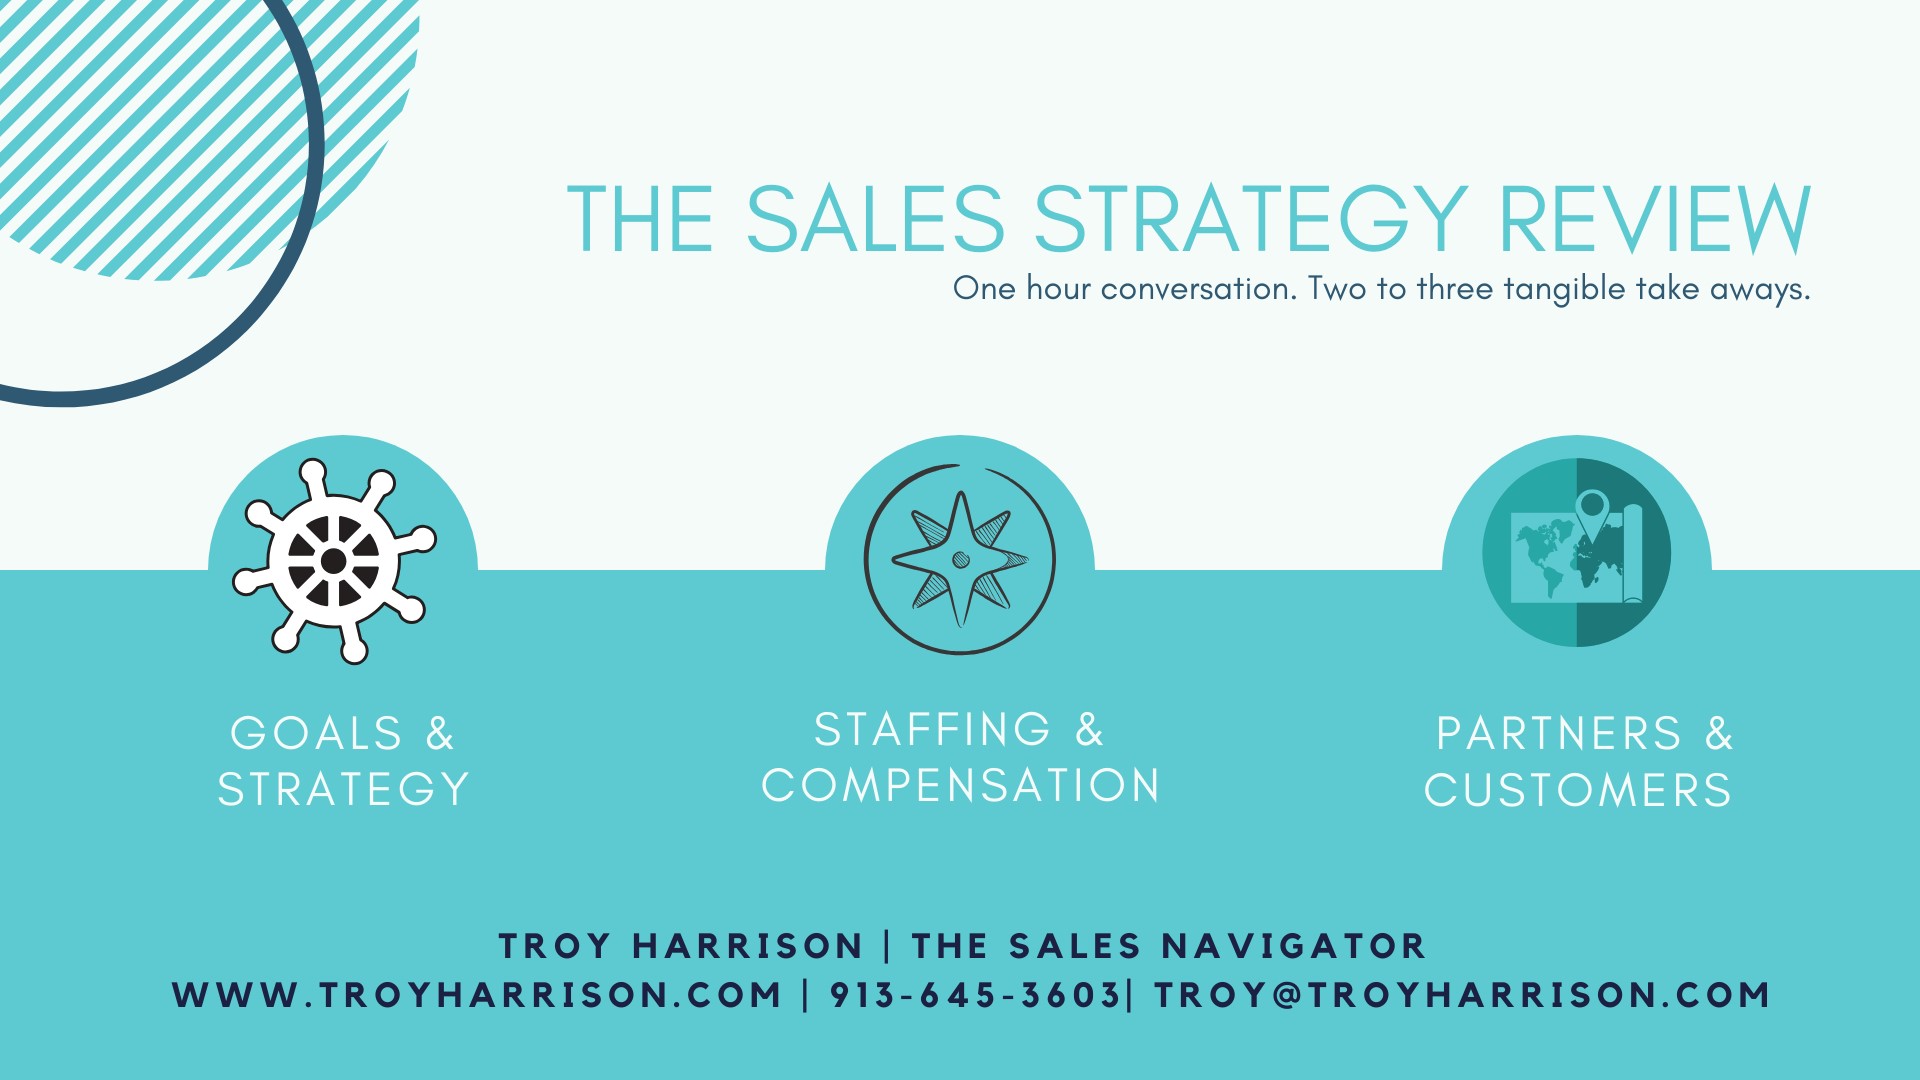 Schedule your complimentary Sales Strategy Review here!